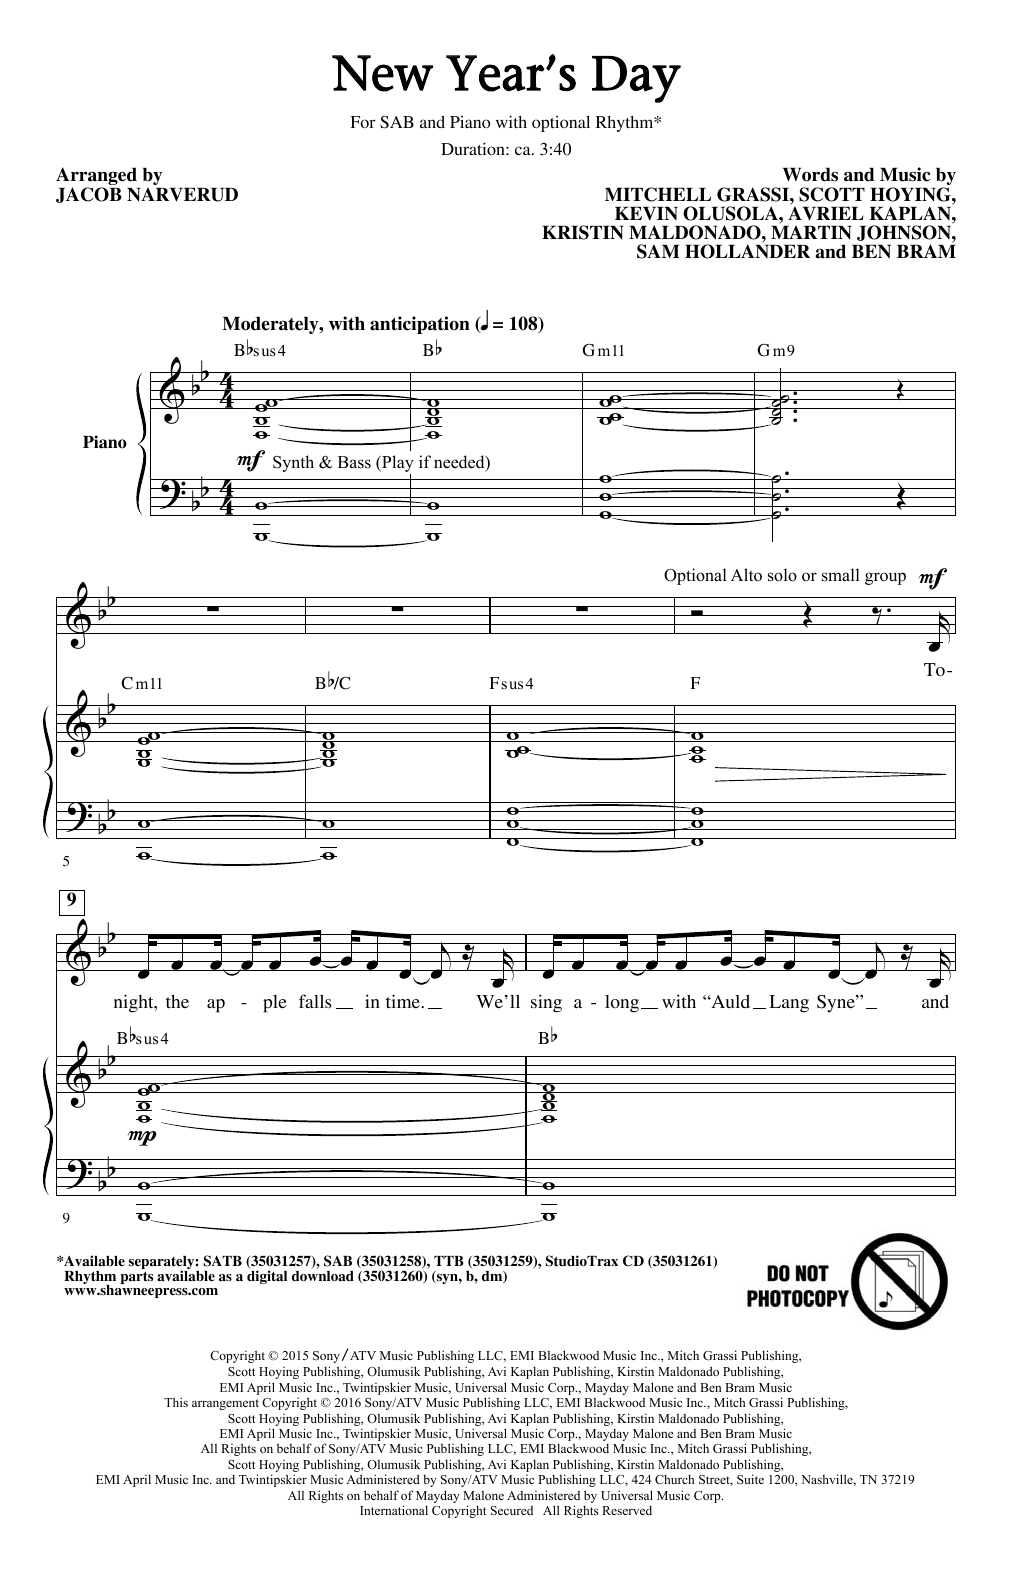 Download Jacob Narverud New Year's Day Sheet Music